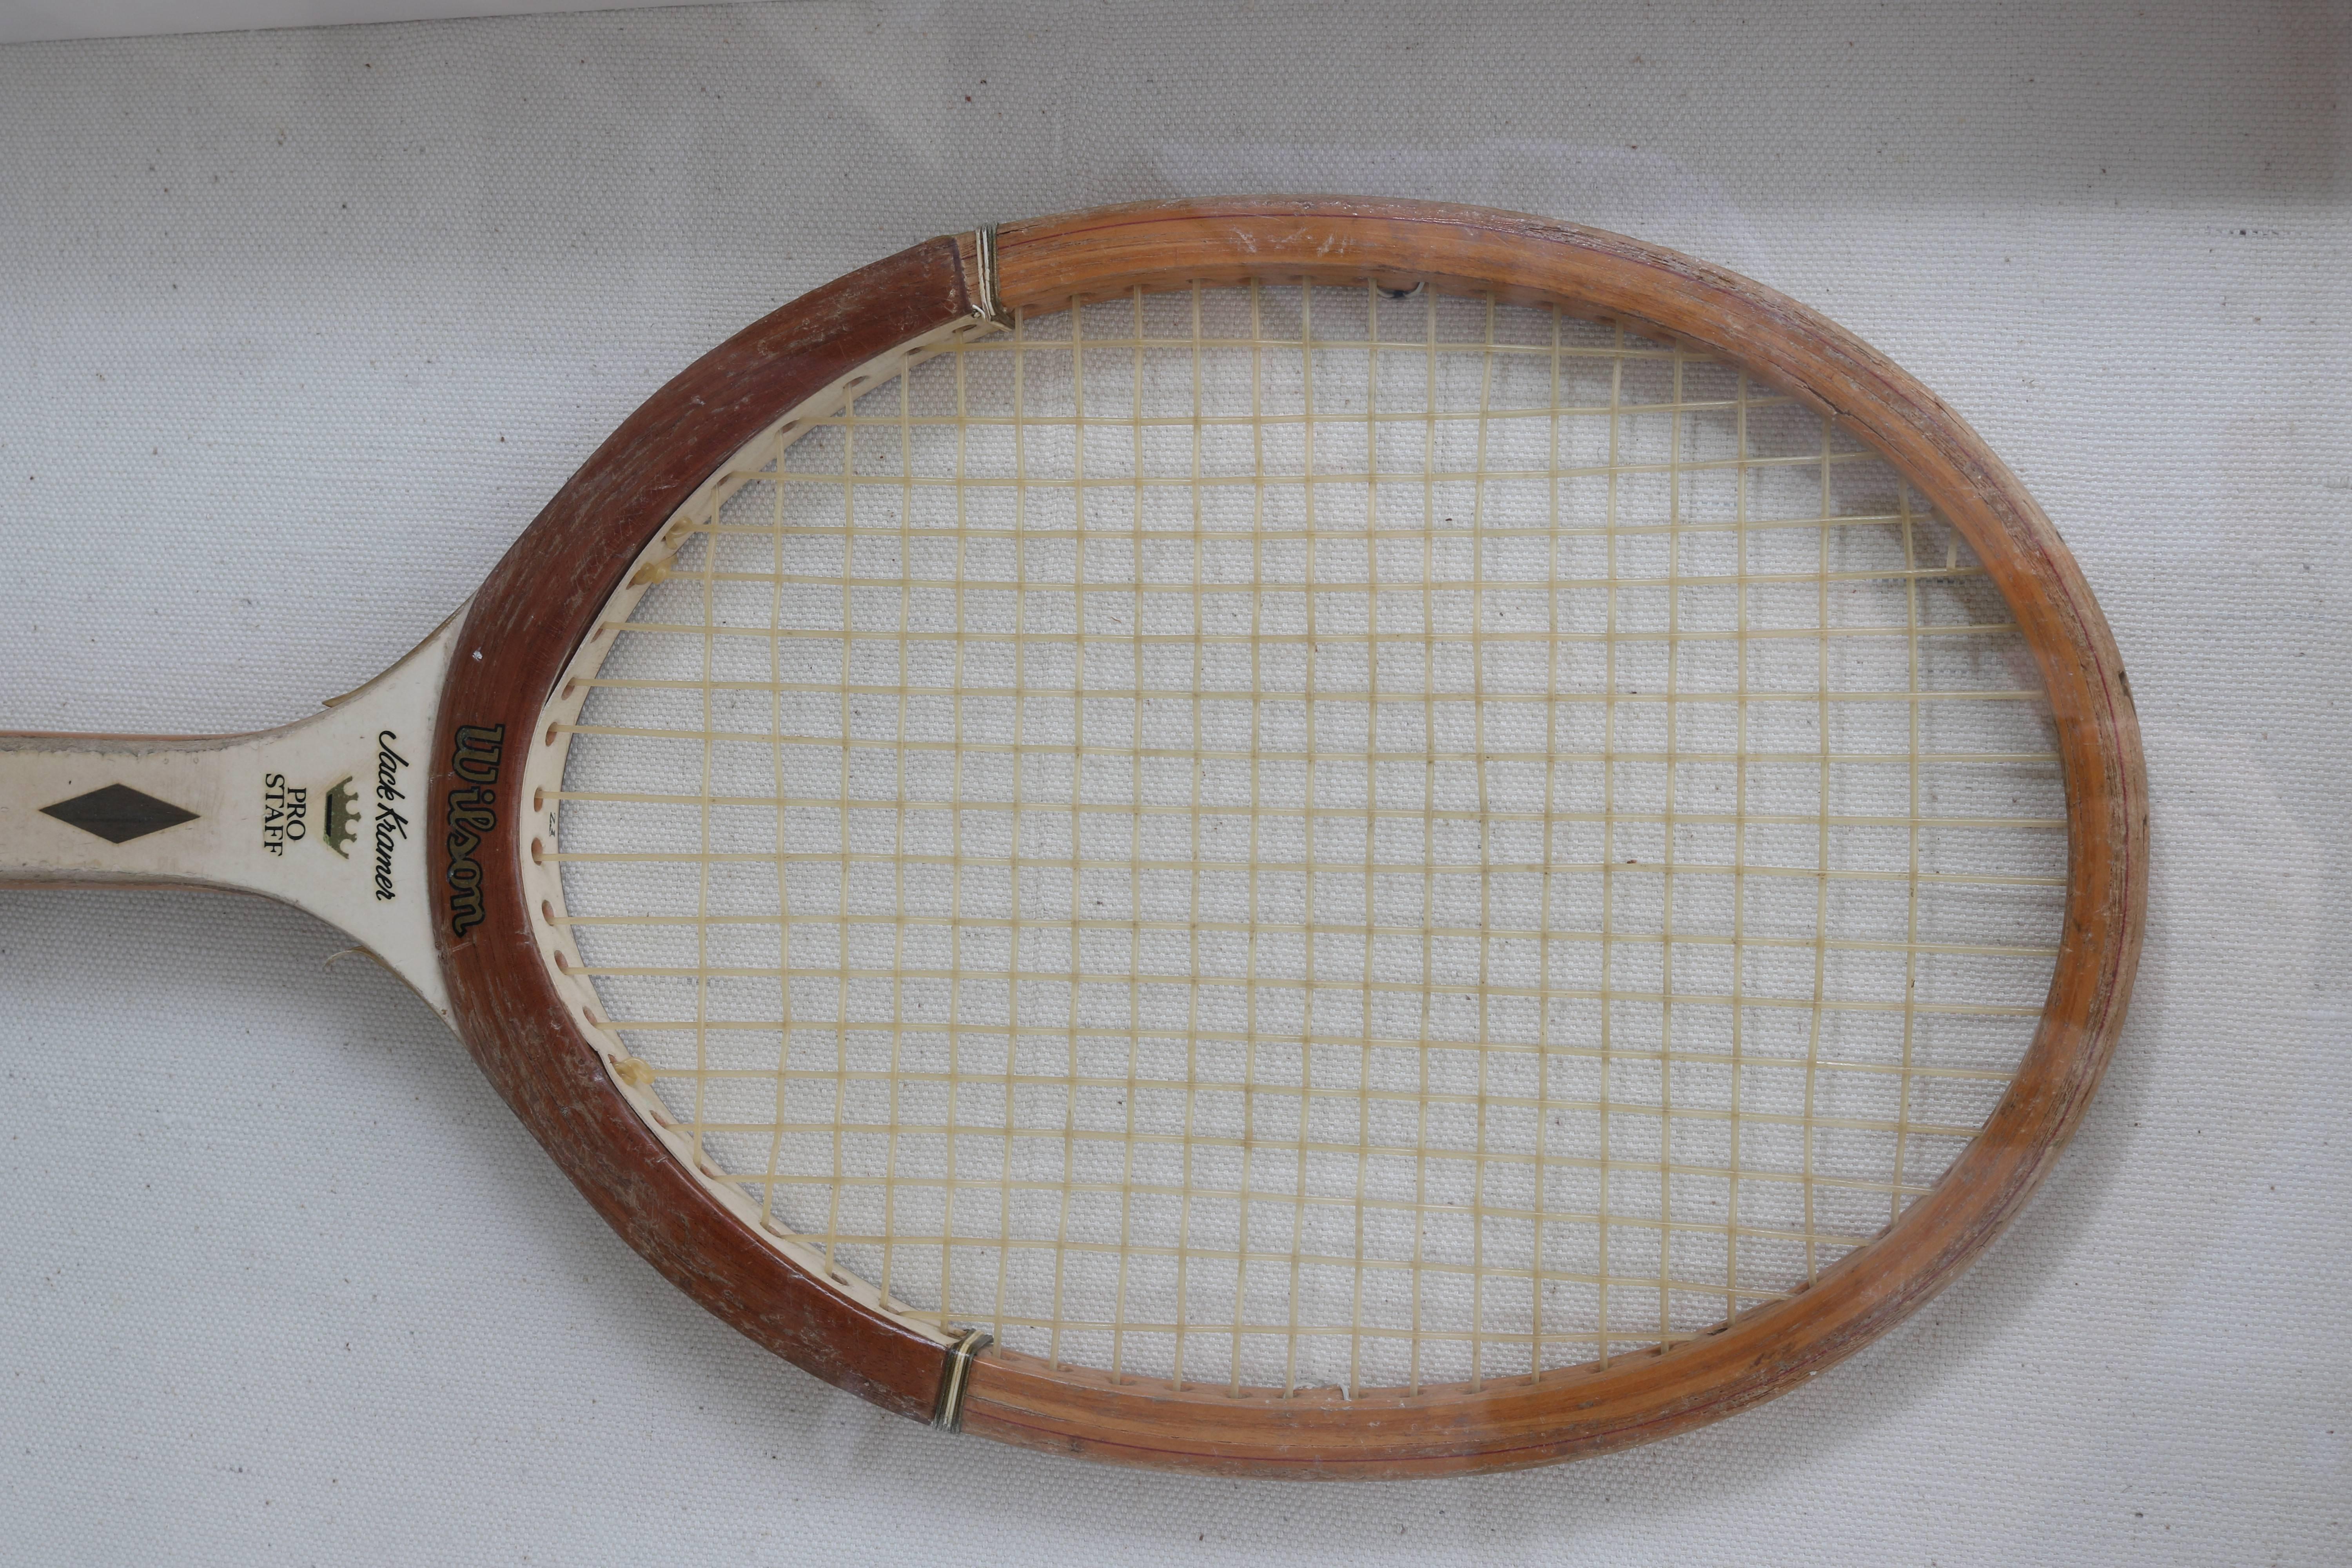 This vintage and Classic tennis racket was designed by Jack Kramer for Wilson Tennis Rackets and has been professionally framed in a Lucite shadow box.
 